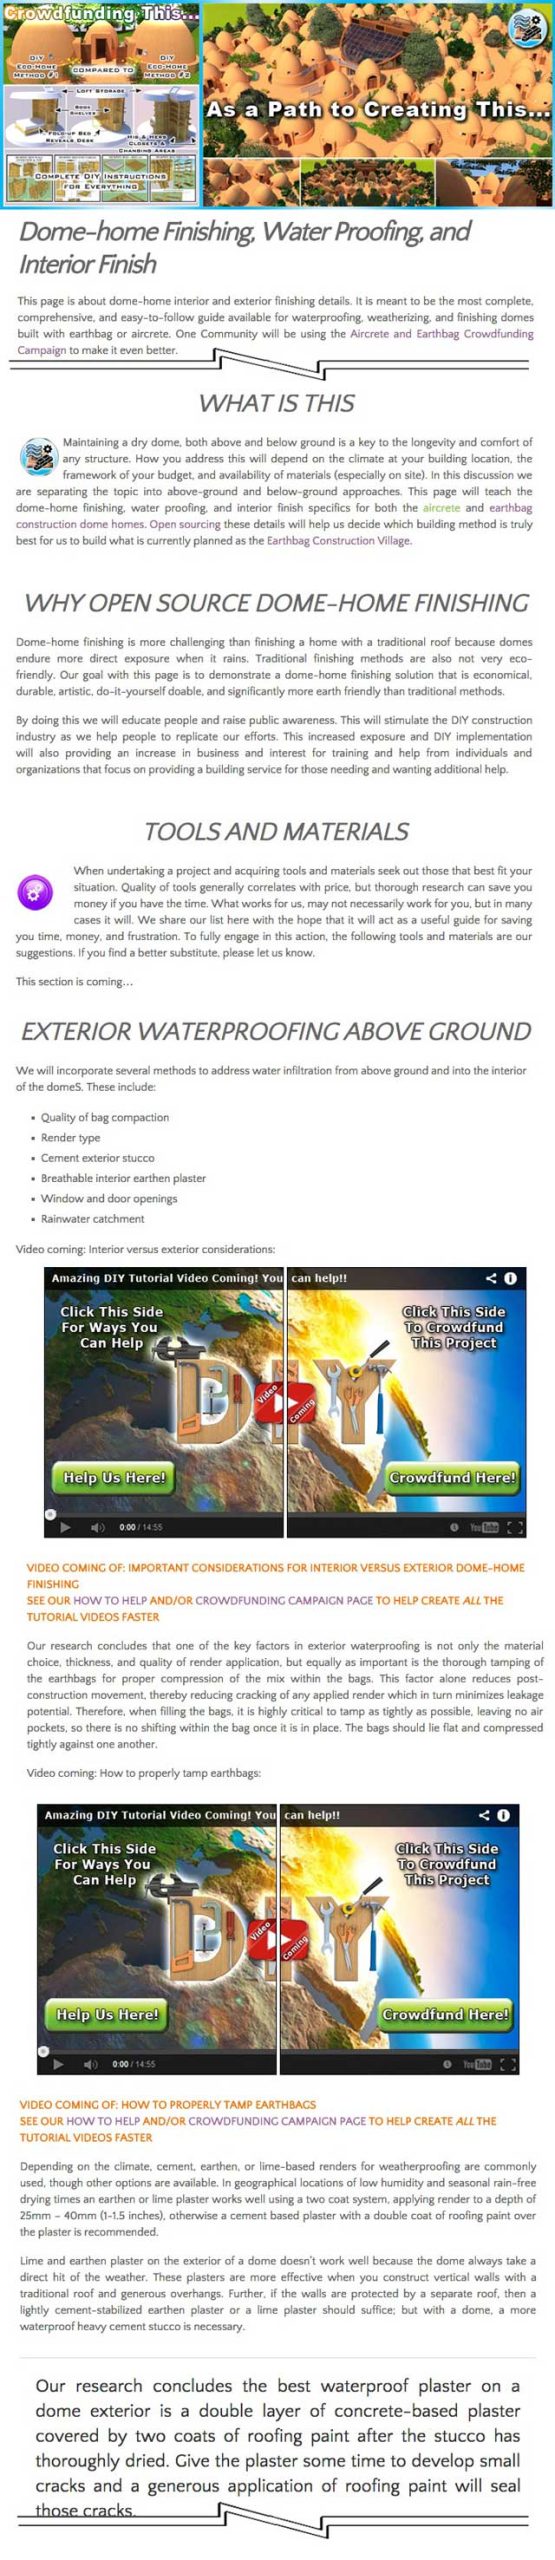 Engineering Our Own Green Future, water proofing page in progress, One Community